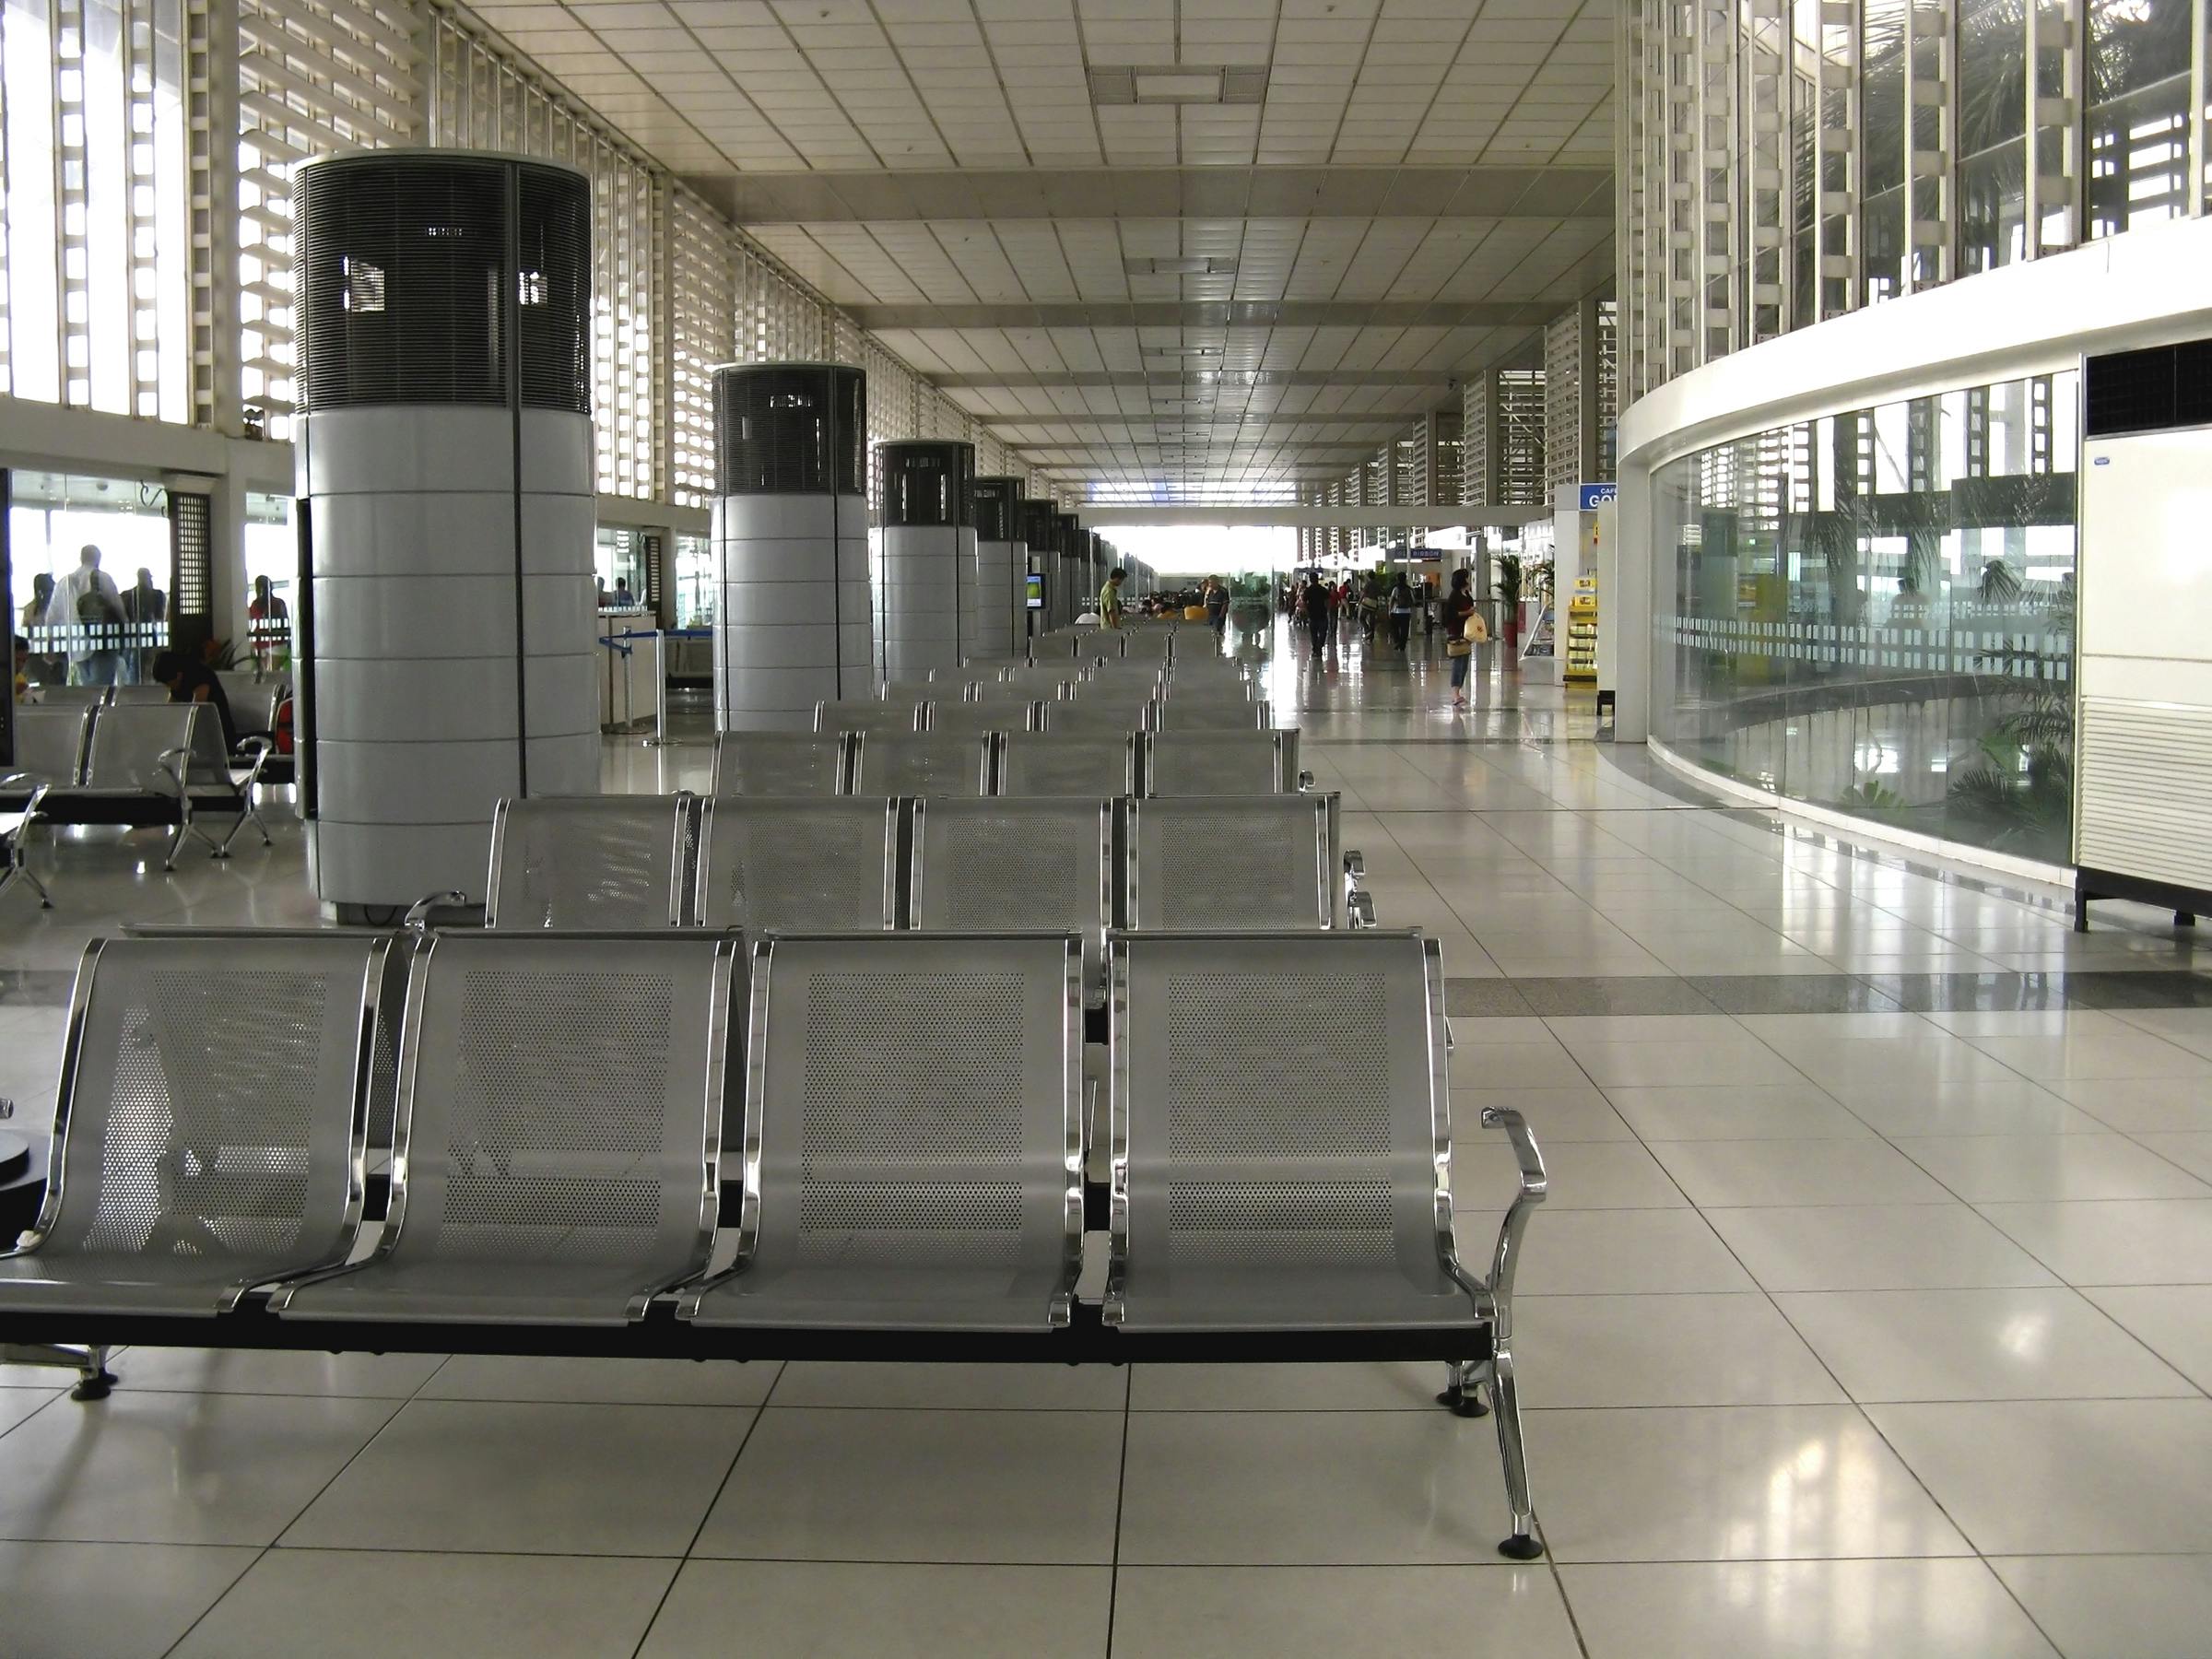 Silver chairs in the waiting area of Manila International Airport